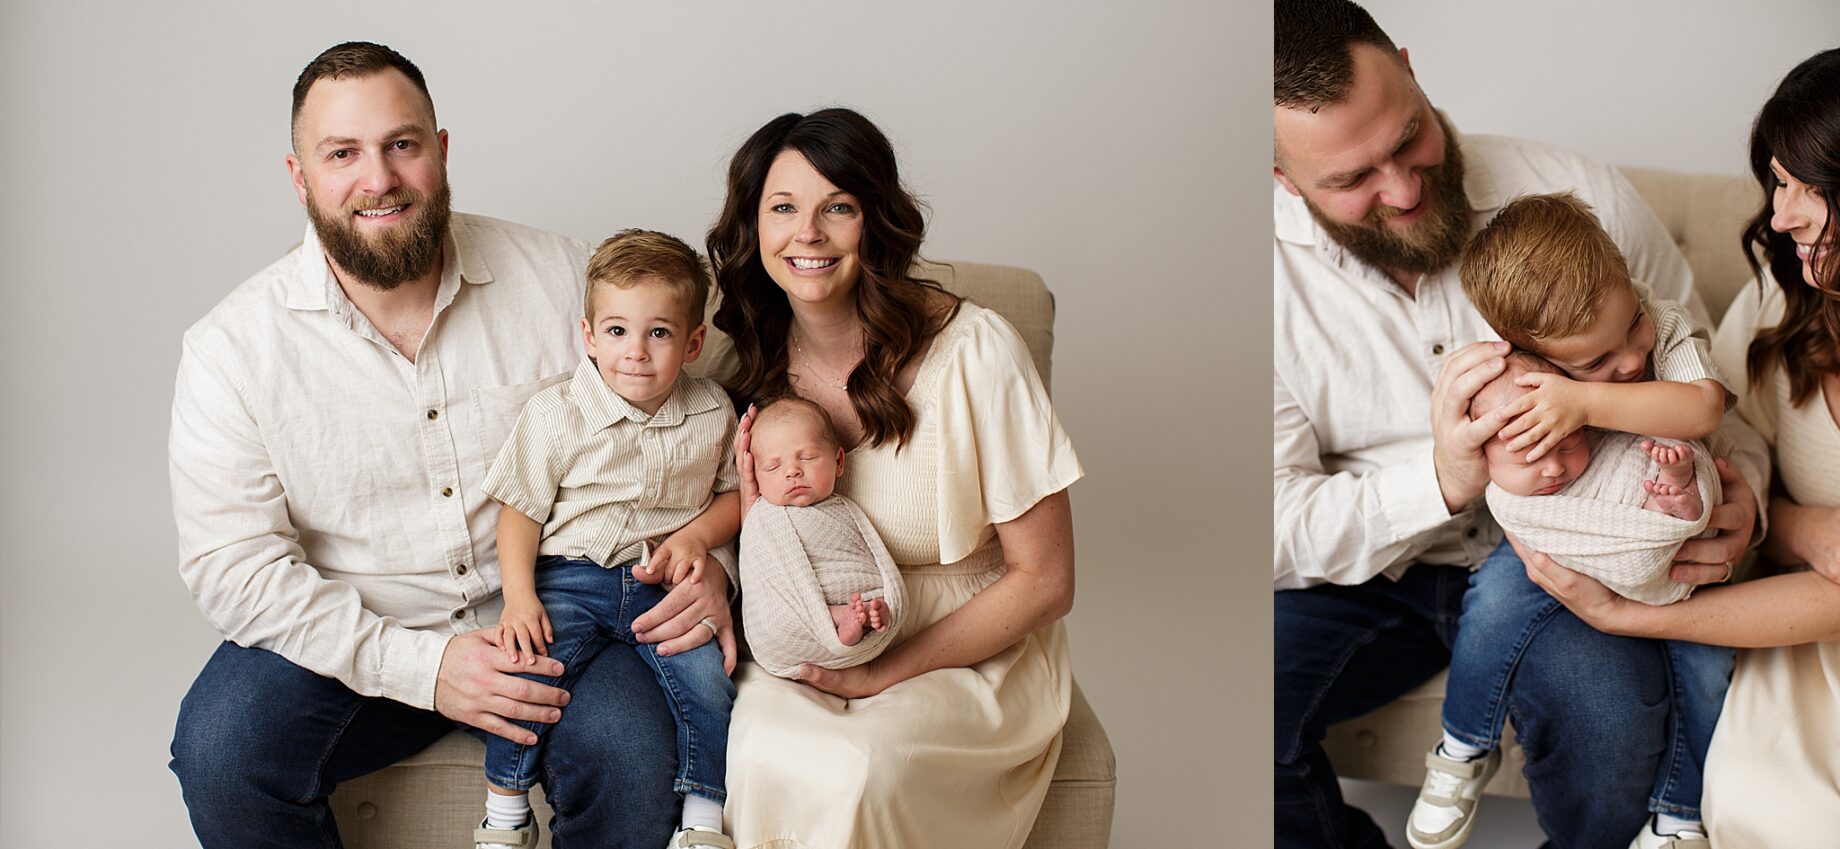 St. Louis newborn photographer, perryville missouri newborn photographer, family newborn photos, white studio backdrop, brother hugging baby, mom and dad, neutral photoshoot
